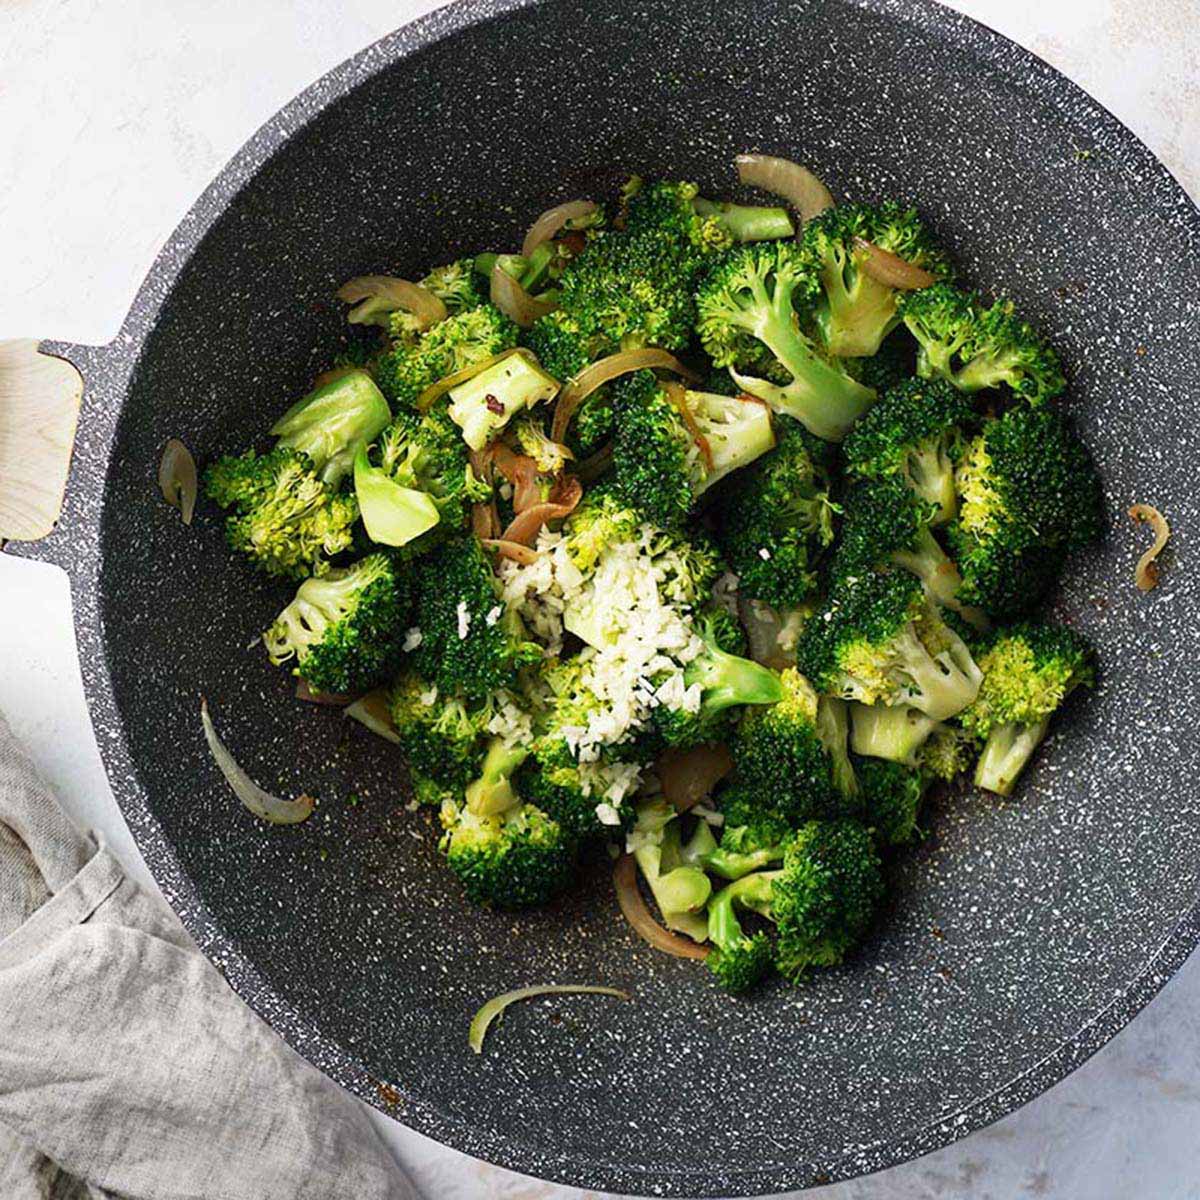 Cooking broccoli, onions and garlic on a wok.